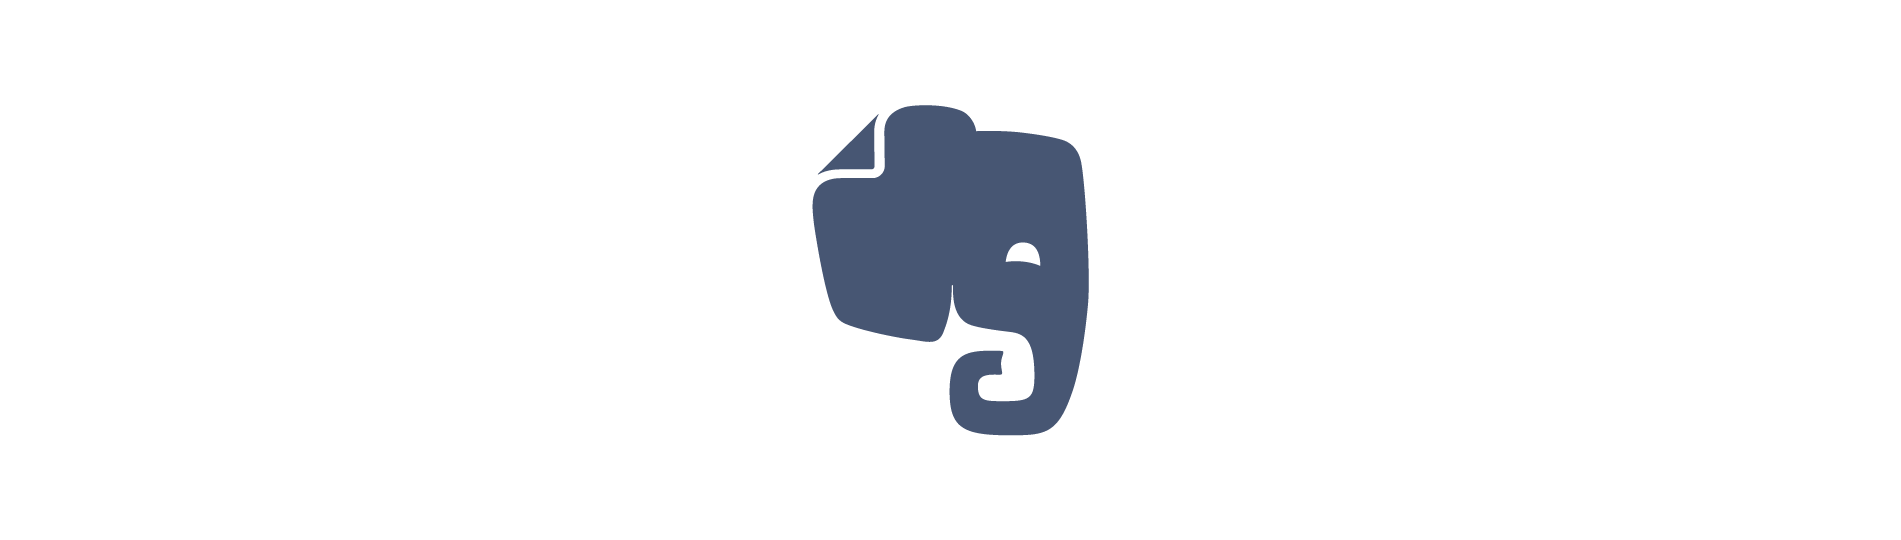 Assembla Integration with Evernote